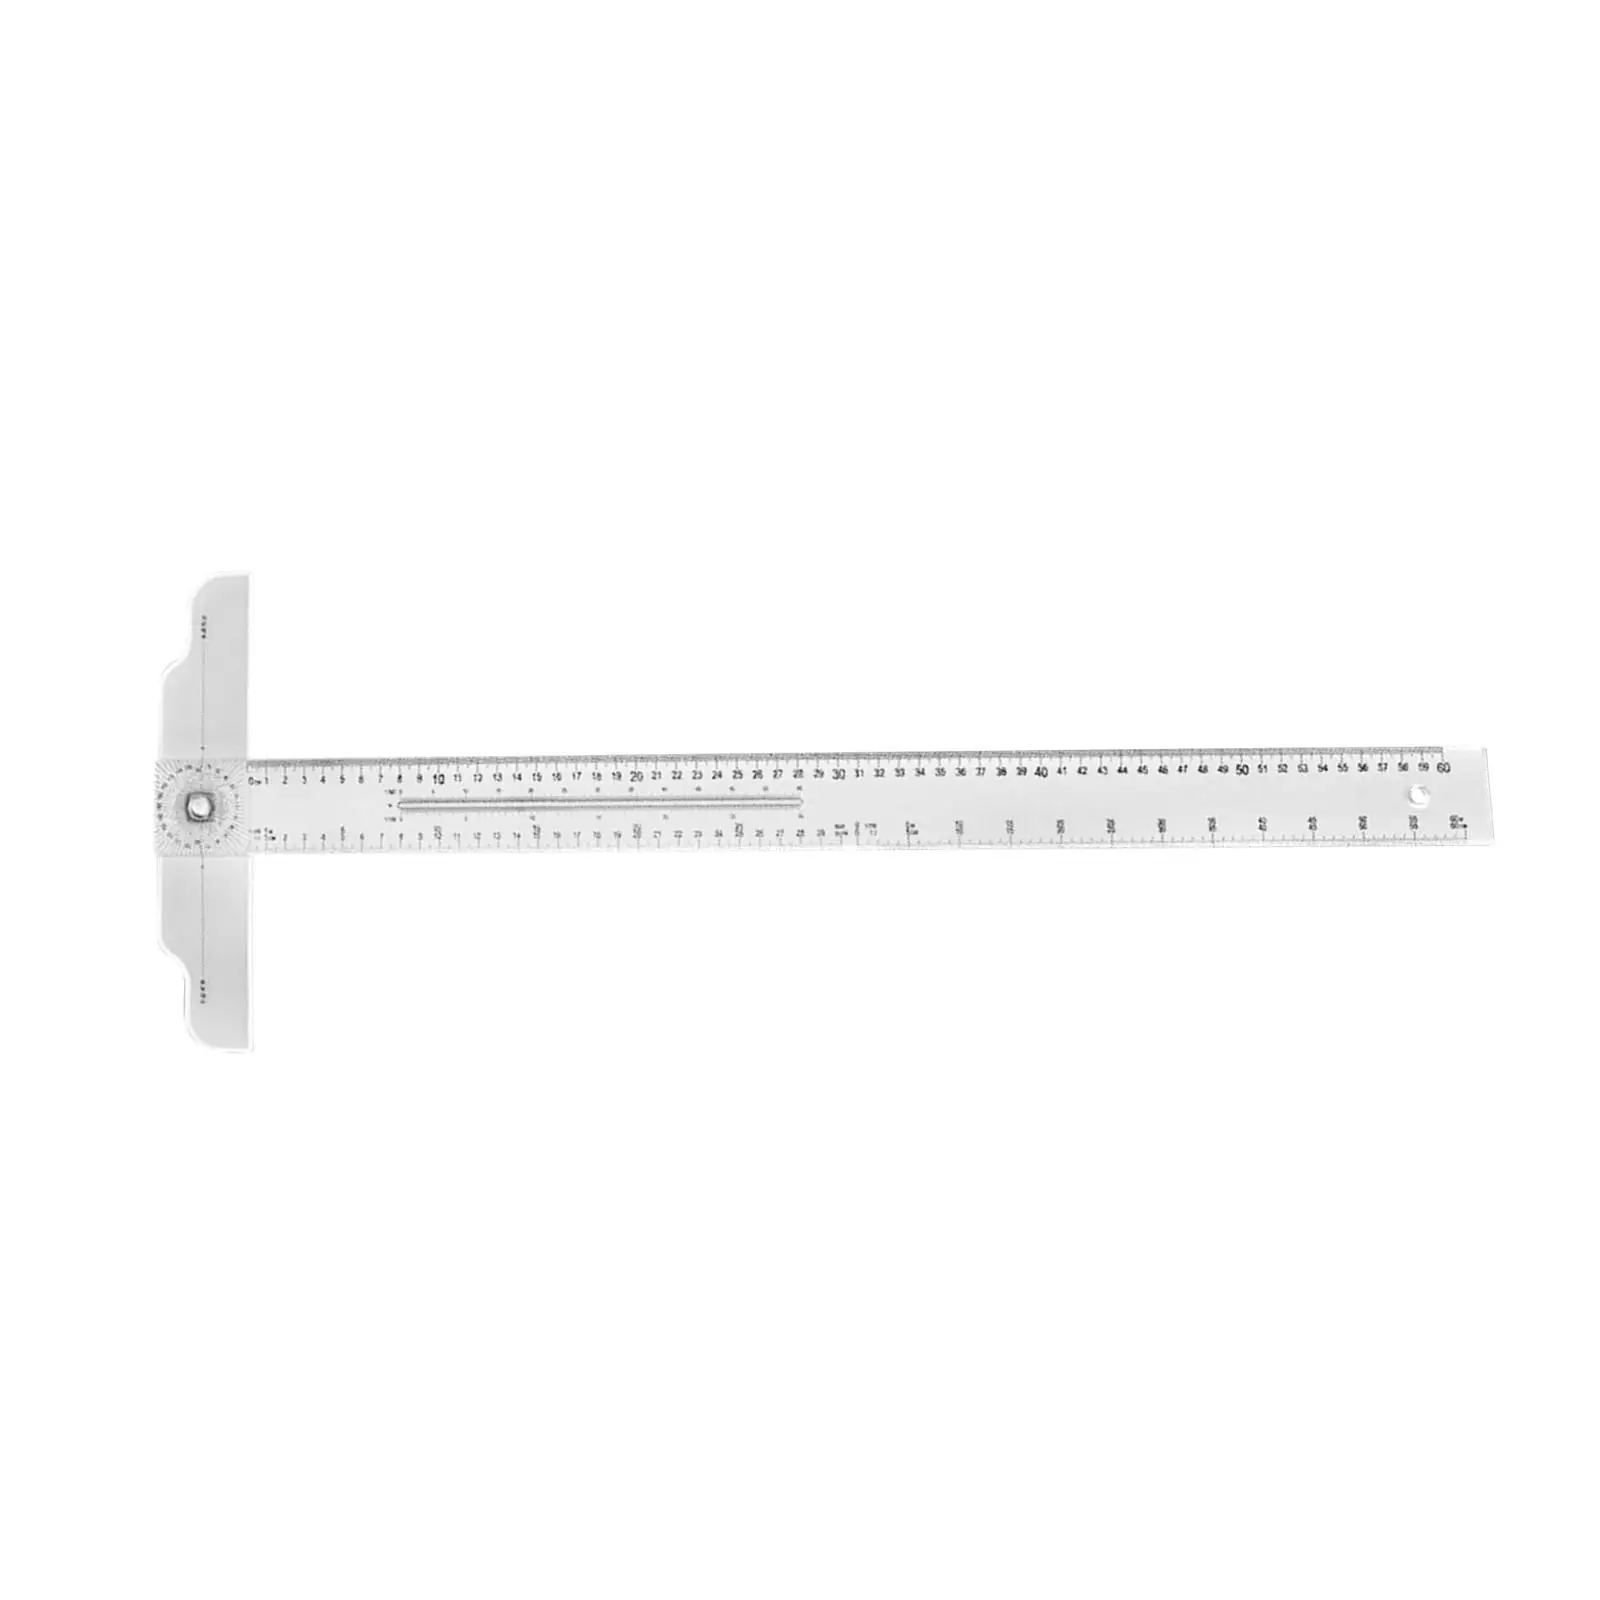 60cm T Square Ruler Rotating Transparent Angle Ruler Angle Measure Tool Multi Function for Woodworking Drafting Engineering